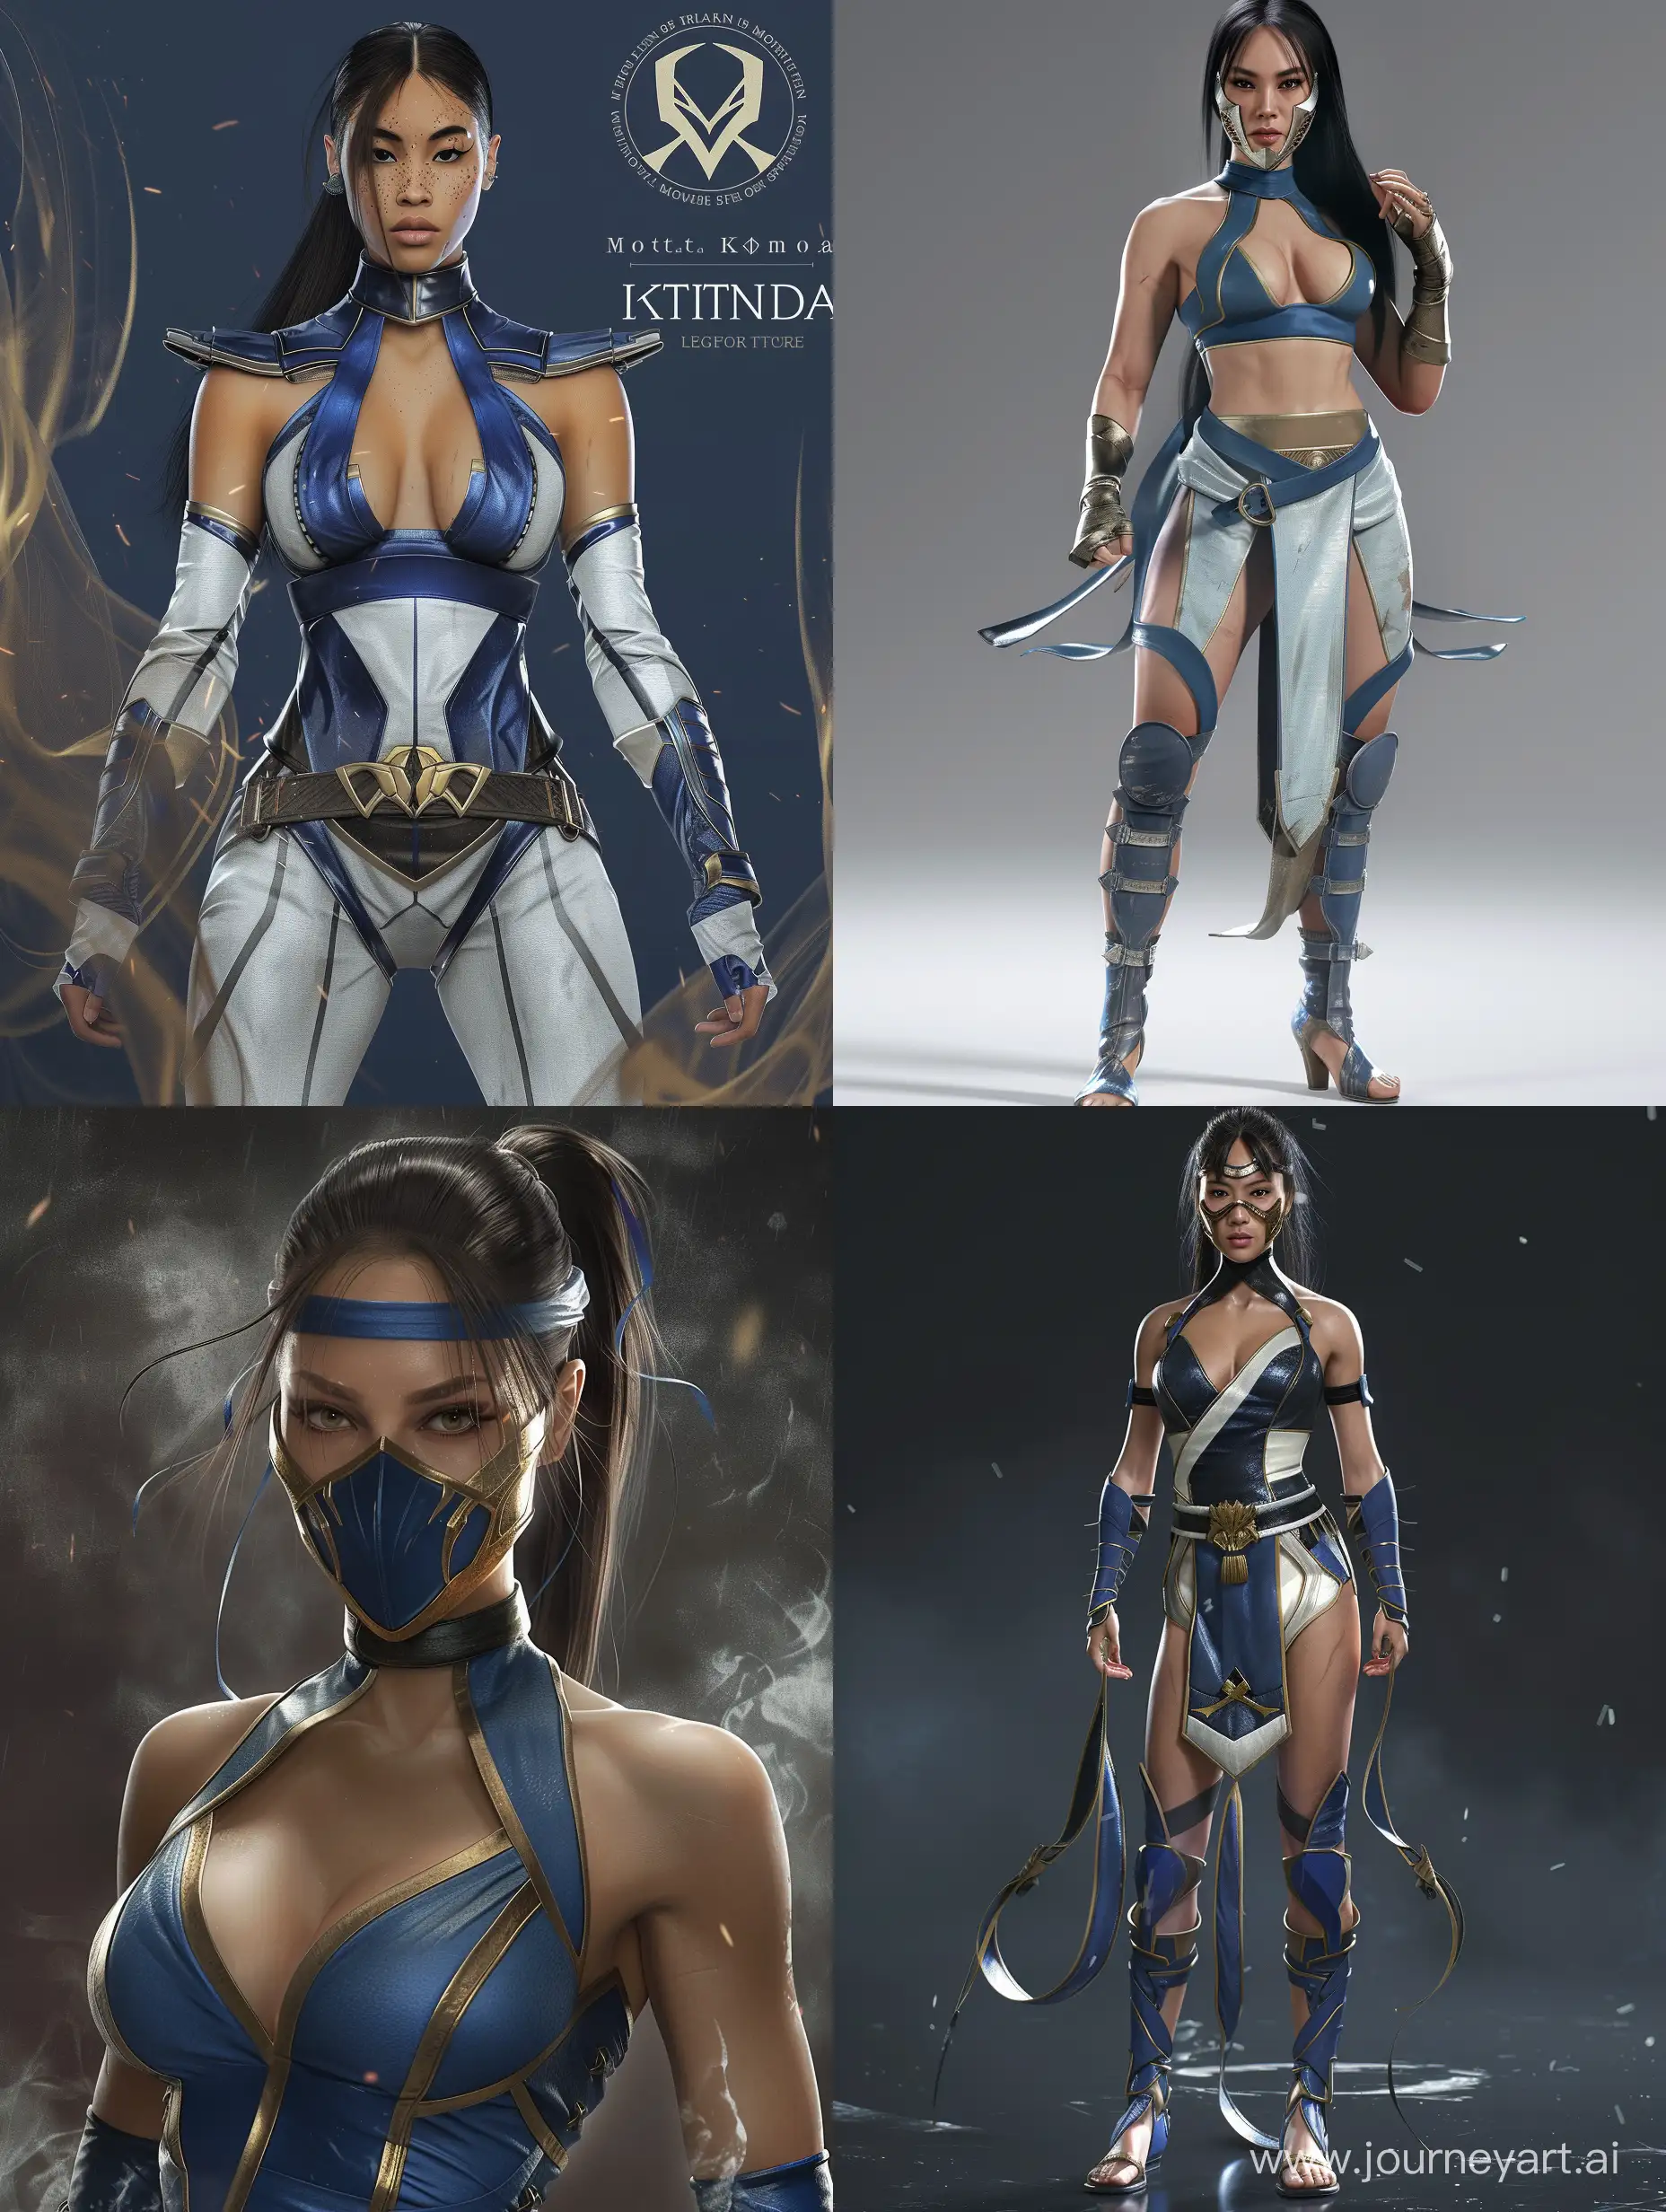 Princess Kitana from Mortal Kombat in a combat stance, wearing her alluring uniform, rendered with photorealistic detail. Ensure the portrayal captures her strength, grace, and elegance, highlighting her iconic fighting spirit.